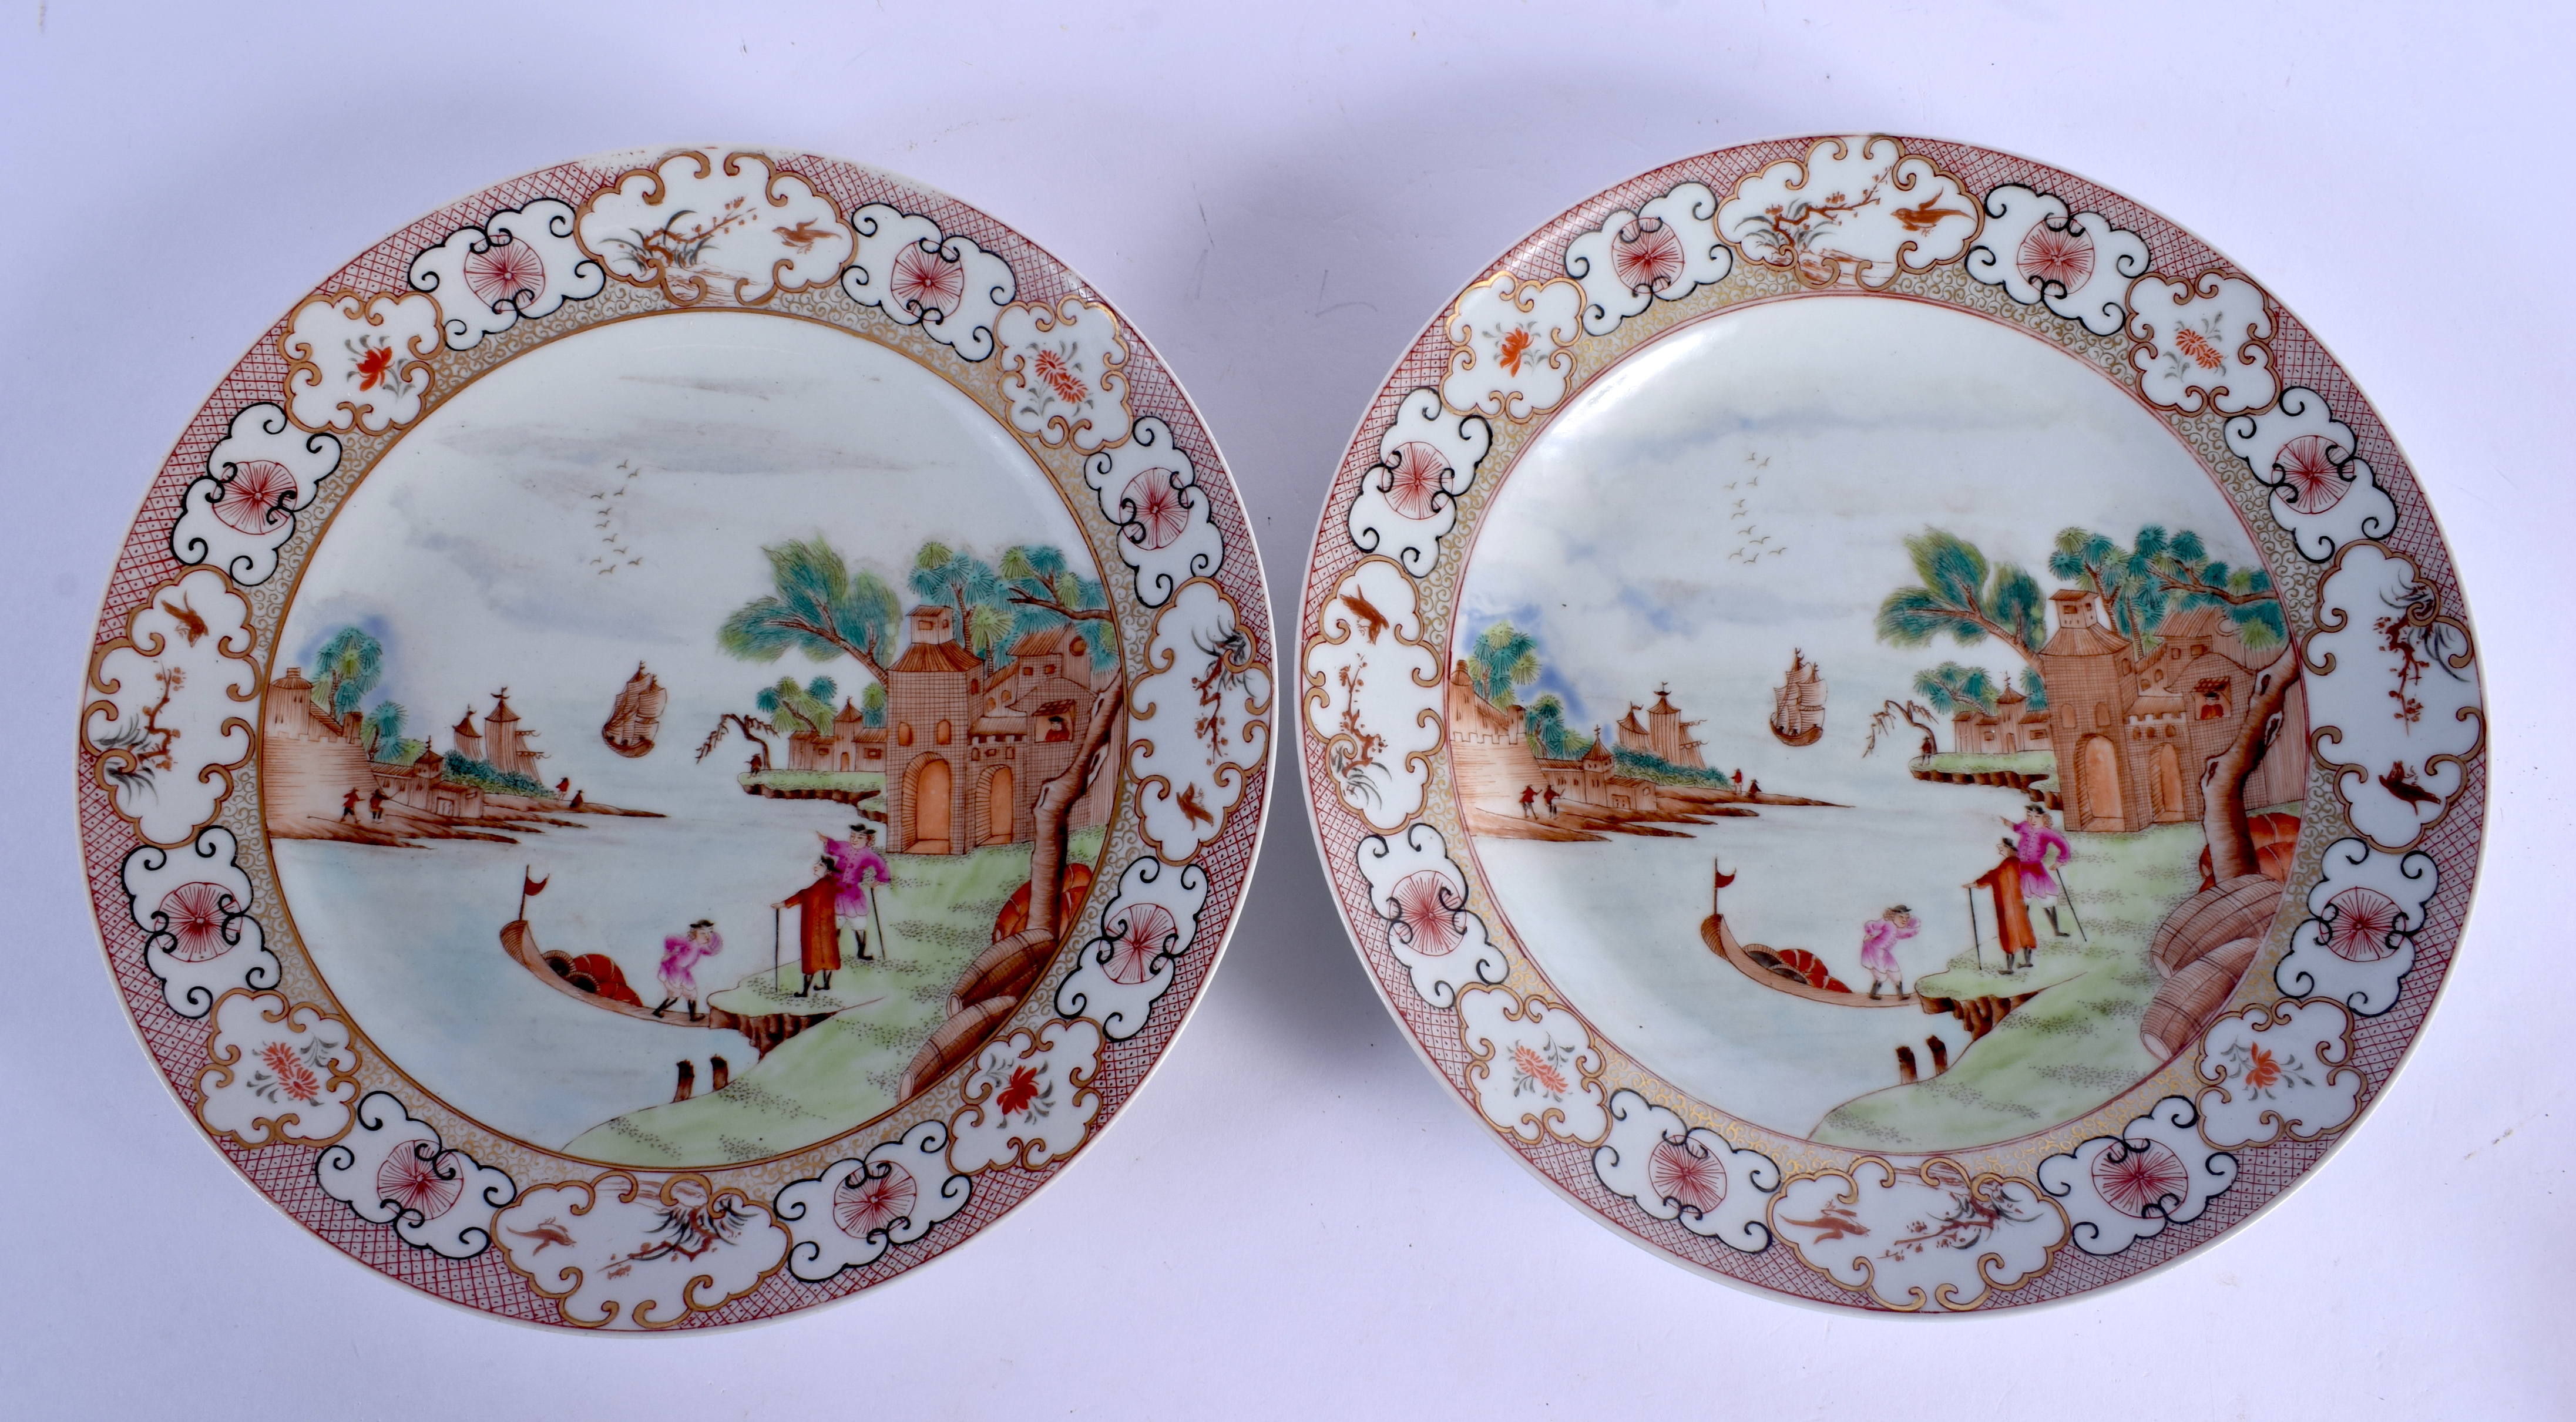 A PAIR OF CHINESE FAMILLE ROSE EXPORT PORCELAIN PLATES 20th Century, painted with European figures.